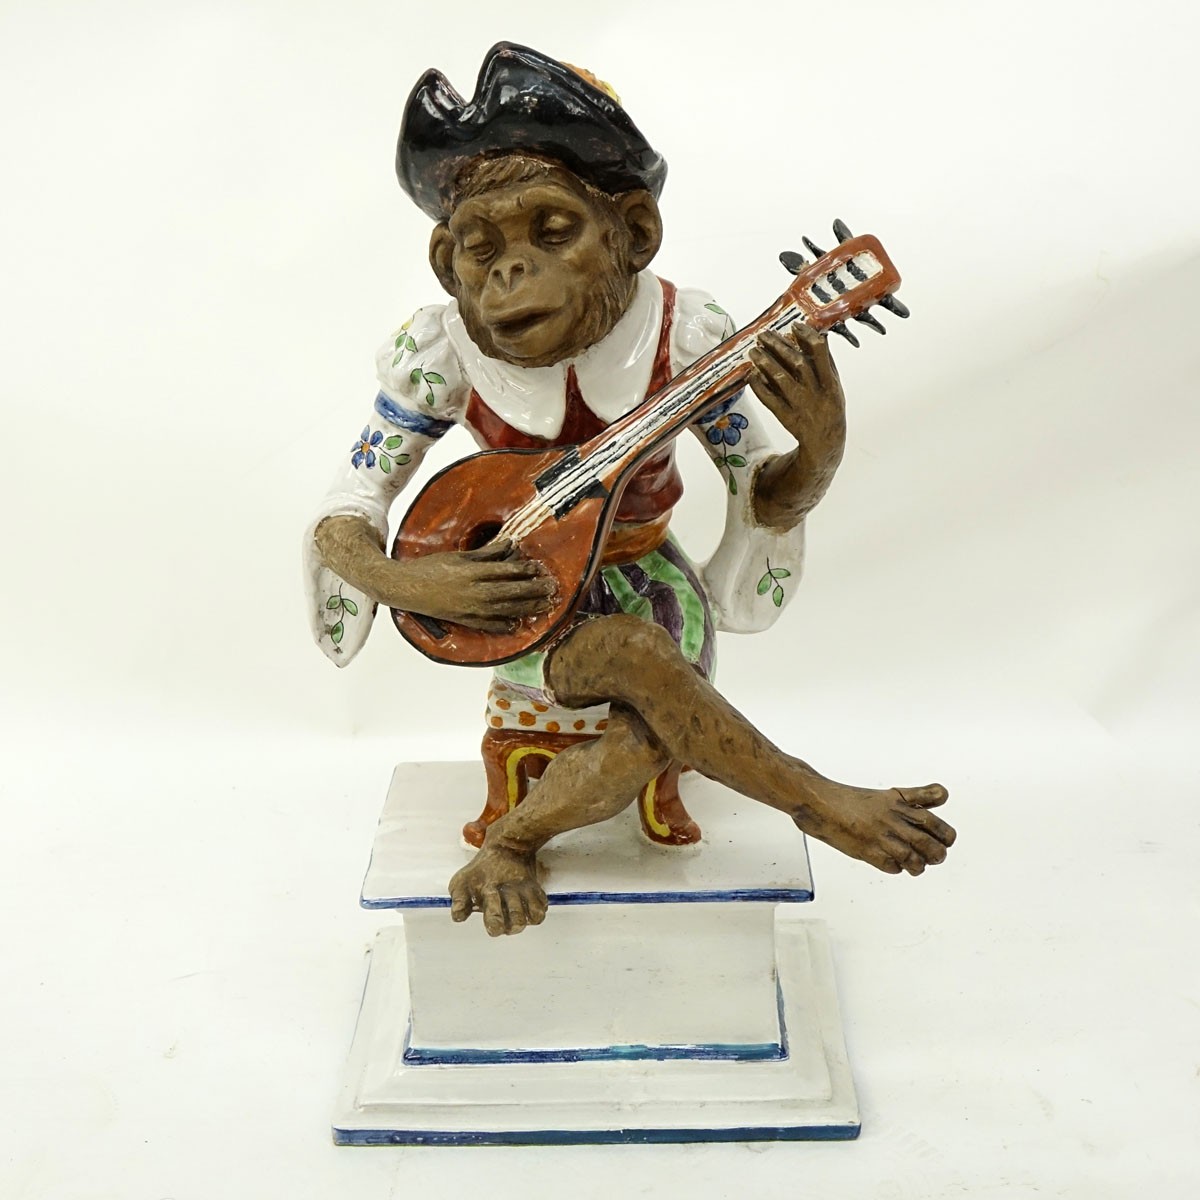 Italian Faience Pottery Figurine, Monkey Musical Player. Signed and numbered to base.